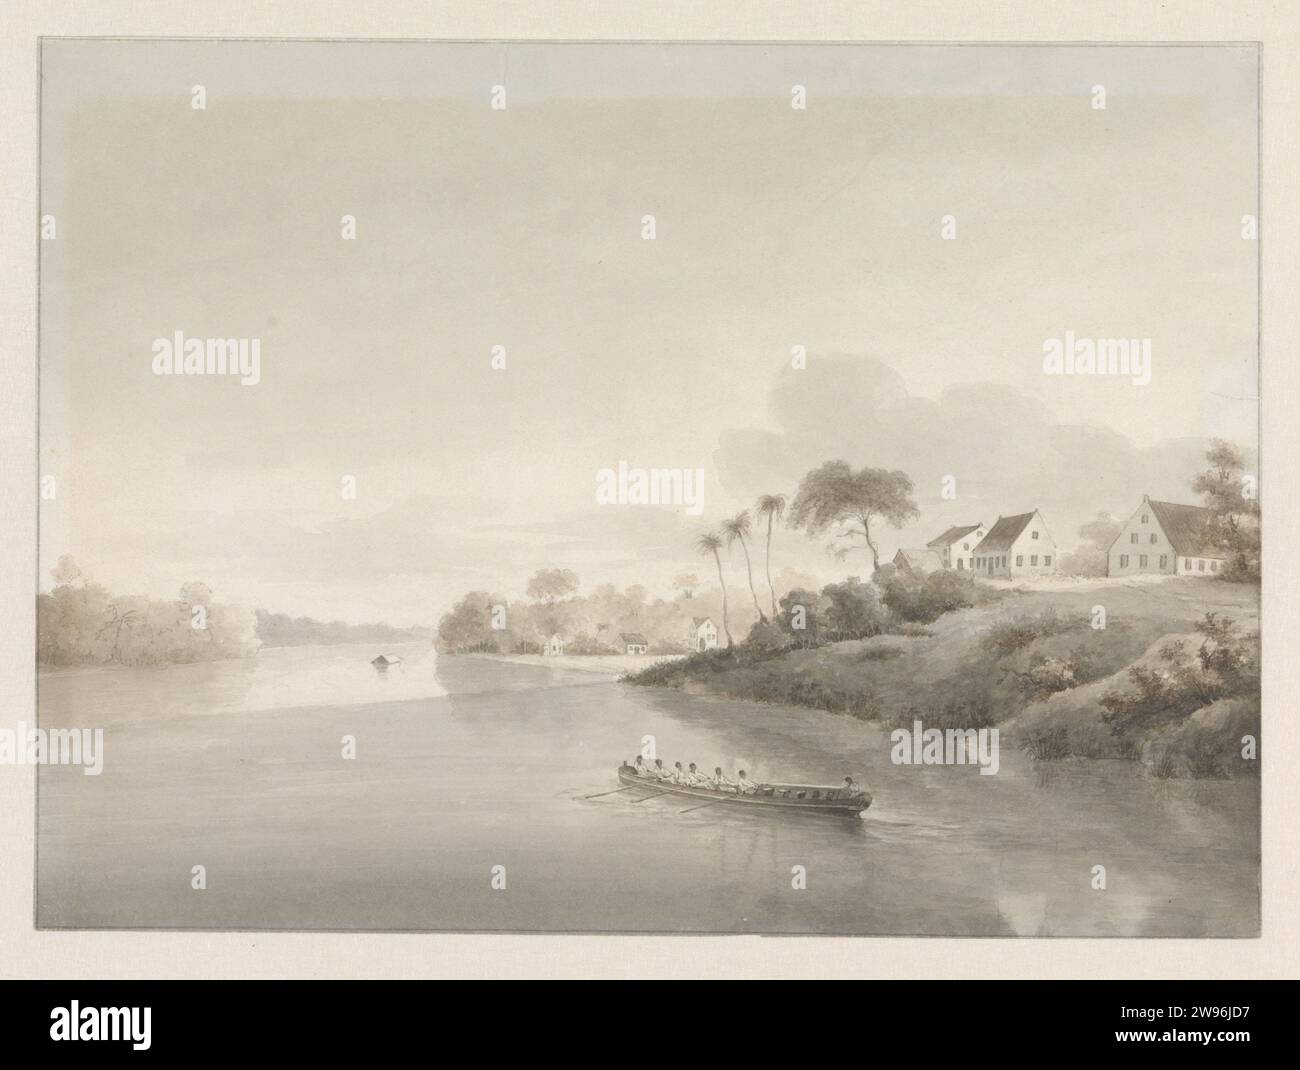 View of a number of houses on a river, possibly the Jewish Savannah, After 1849 - Before 1851 drawing View of a number of houses located on the river, possibly the Jewish Savannah. A tent boat sails on the river with a mate and six rowers. Further on the river, a pondo sails, a small cargo ship sealed with banana leaf. Paramaribo paper. ink pen / brush landscapes in tropical and sub-tropical regions Suriname. Jew Stock Photo